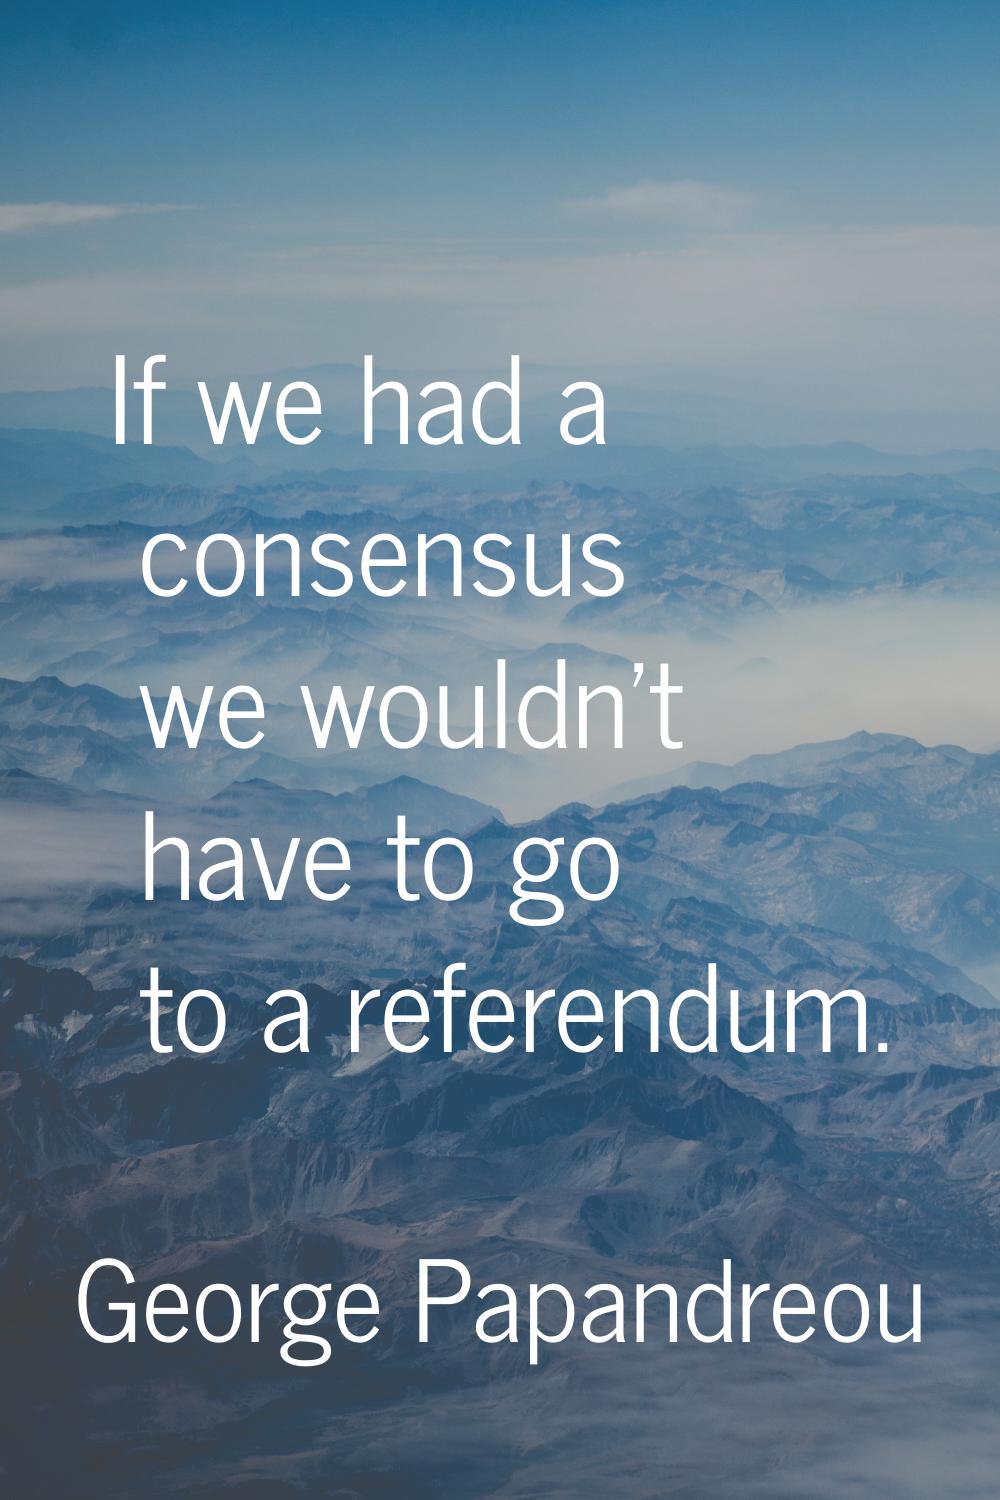 If we had a consensus we wouldn't have to go to a referendum.